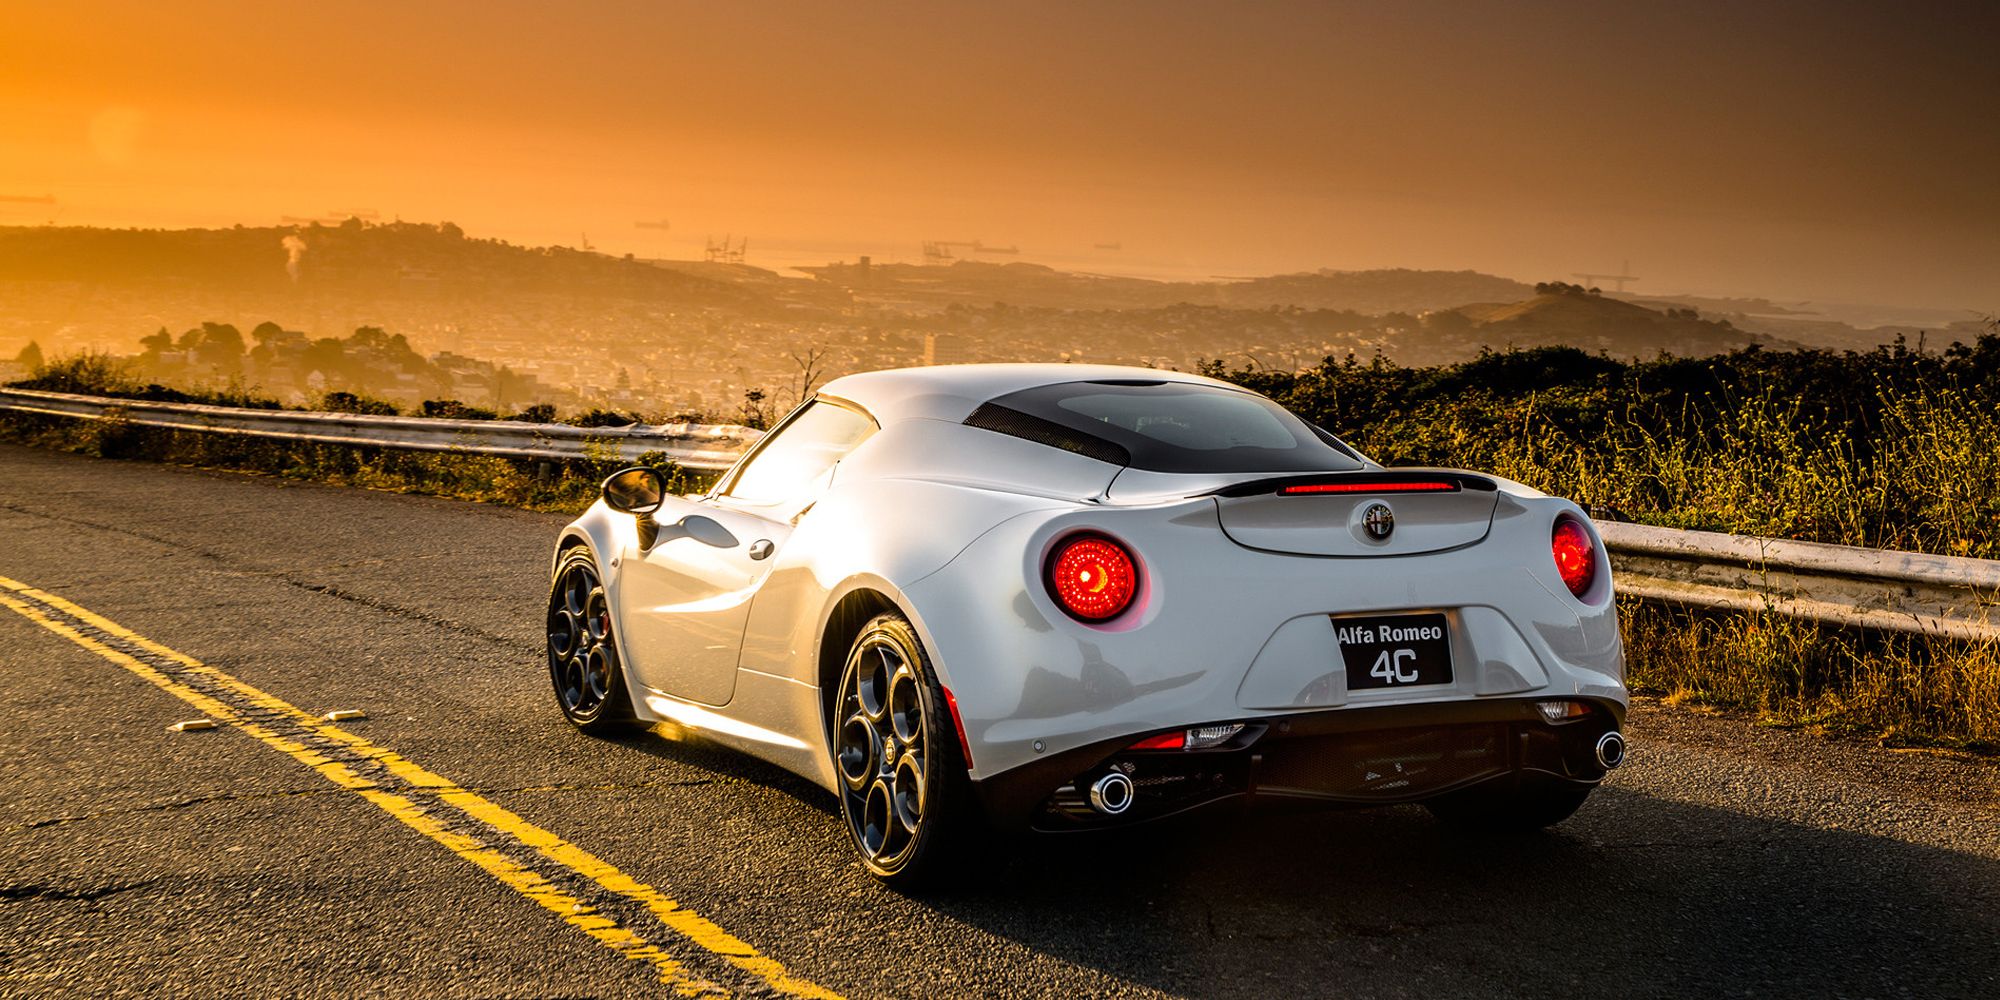 Rear 3/4 view of a white 4C Coupe